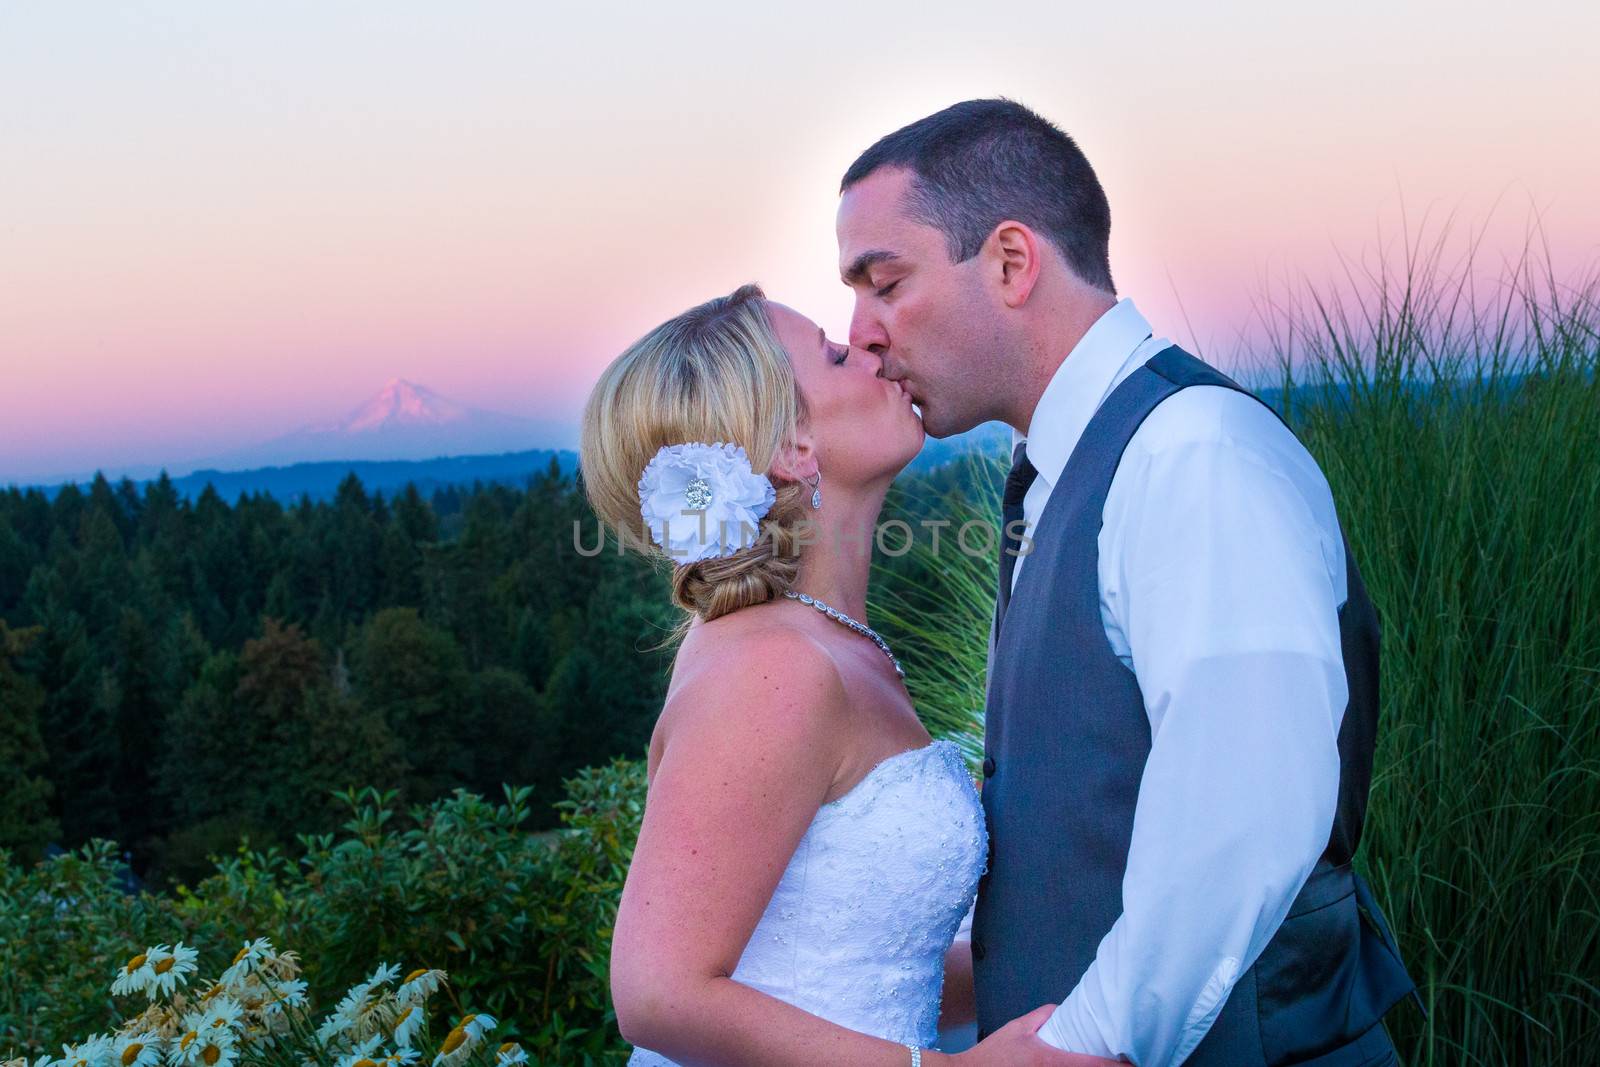 A bride and groom kiss during sunset with Mount Hood in the background at their wedding.